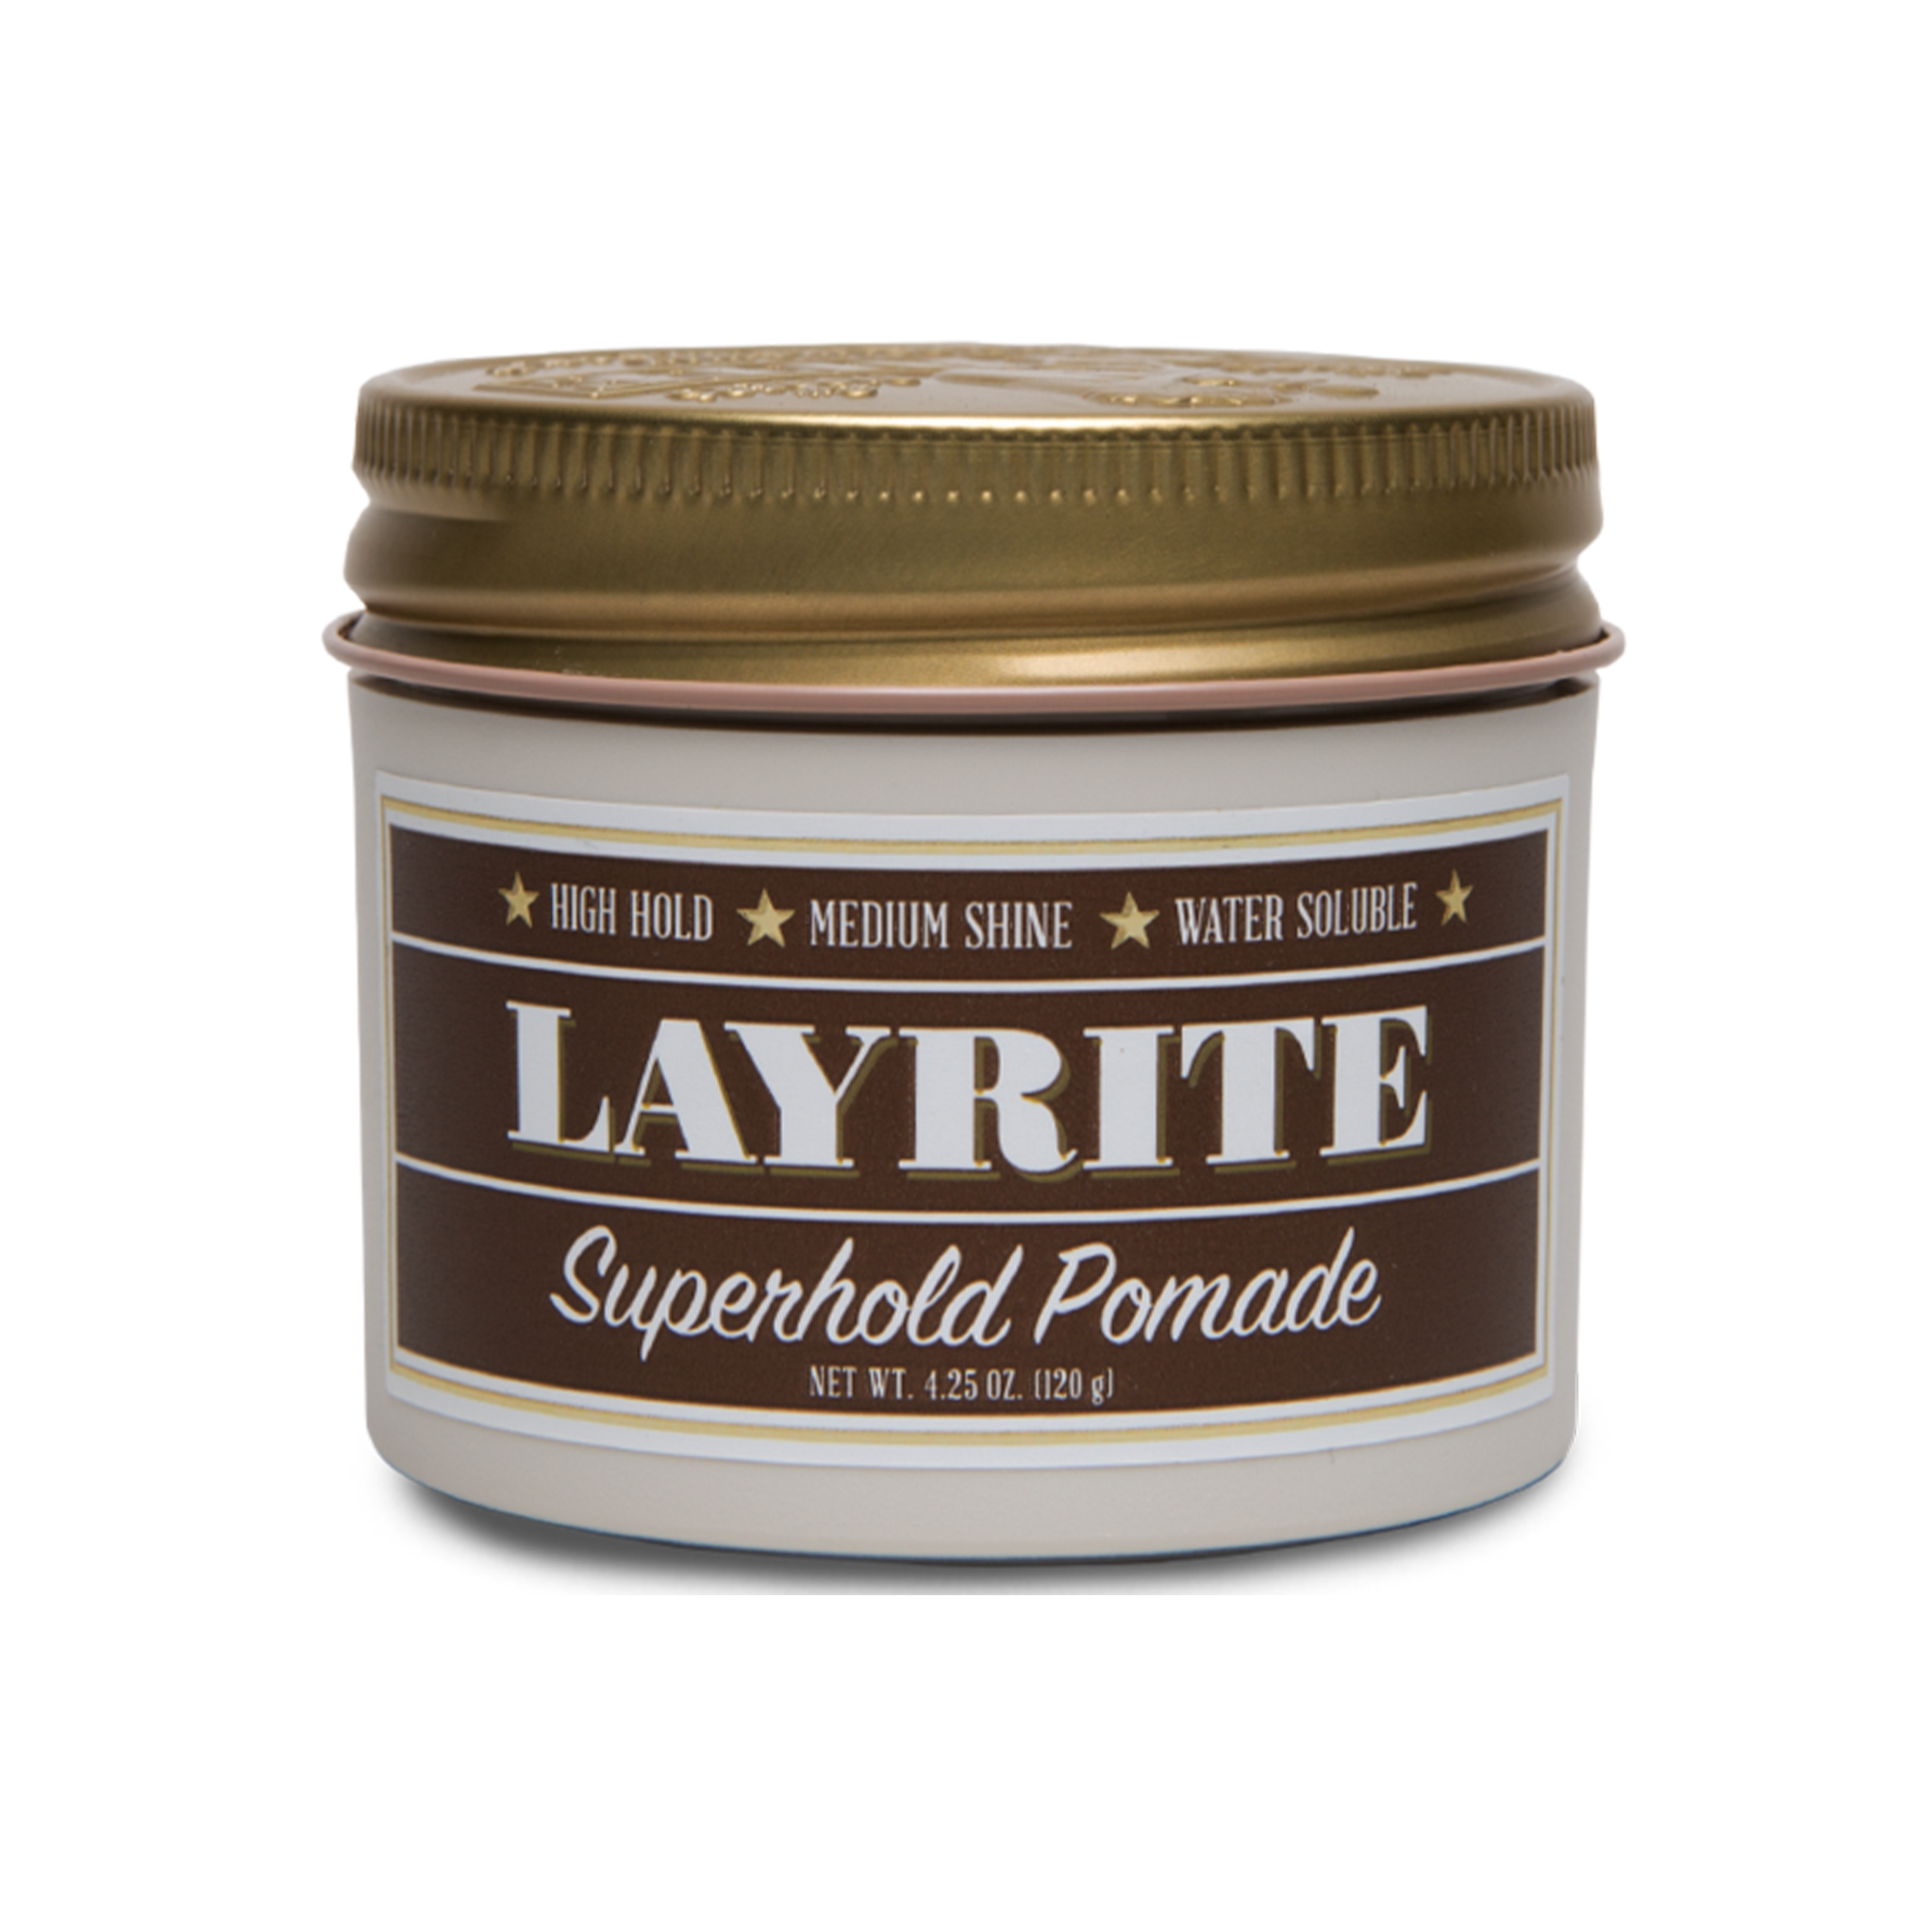 Layrite Superhold Pomade (High Hold, Medium Shine, Water Soluble